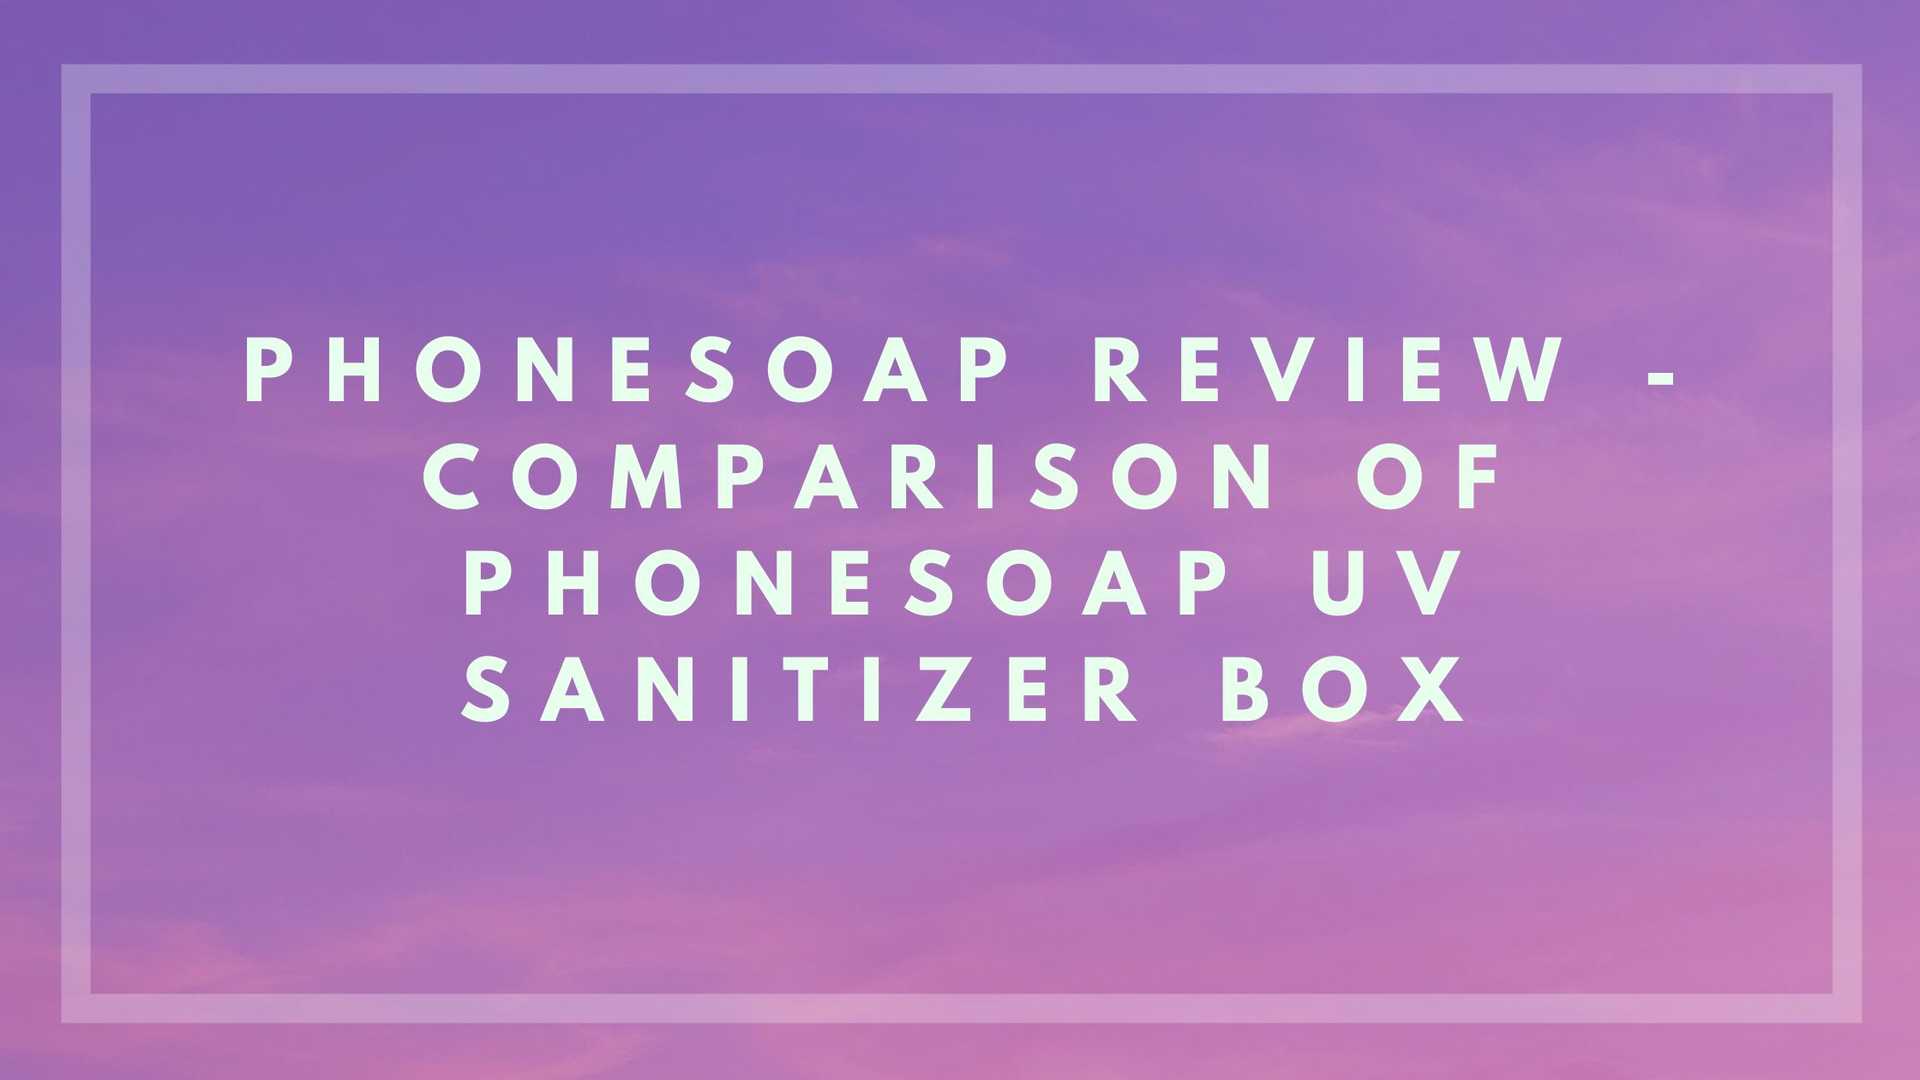 PhoneSoap Review - Comparison of the PhoneSoap UV Sanitizer Box